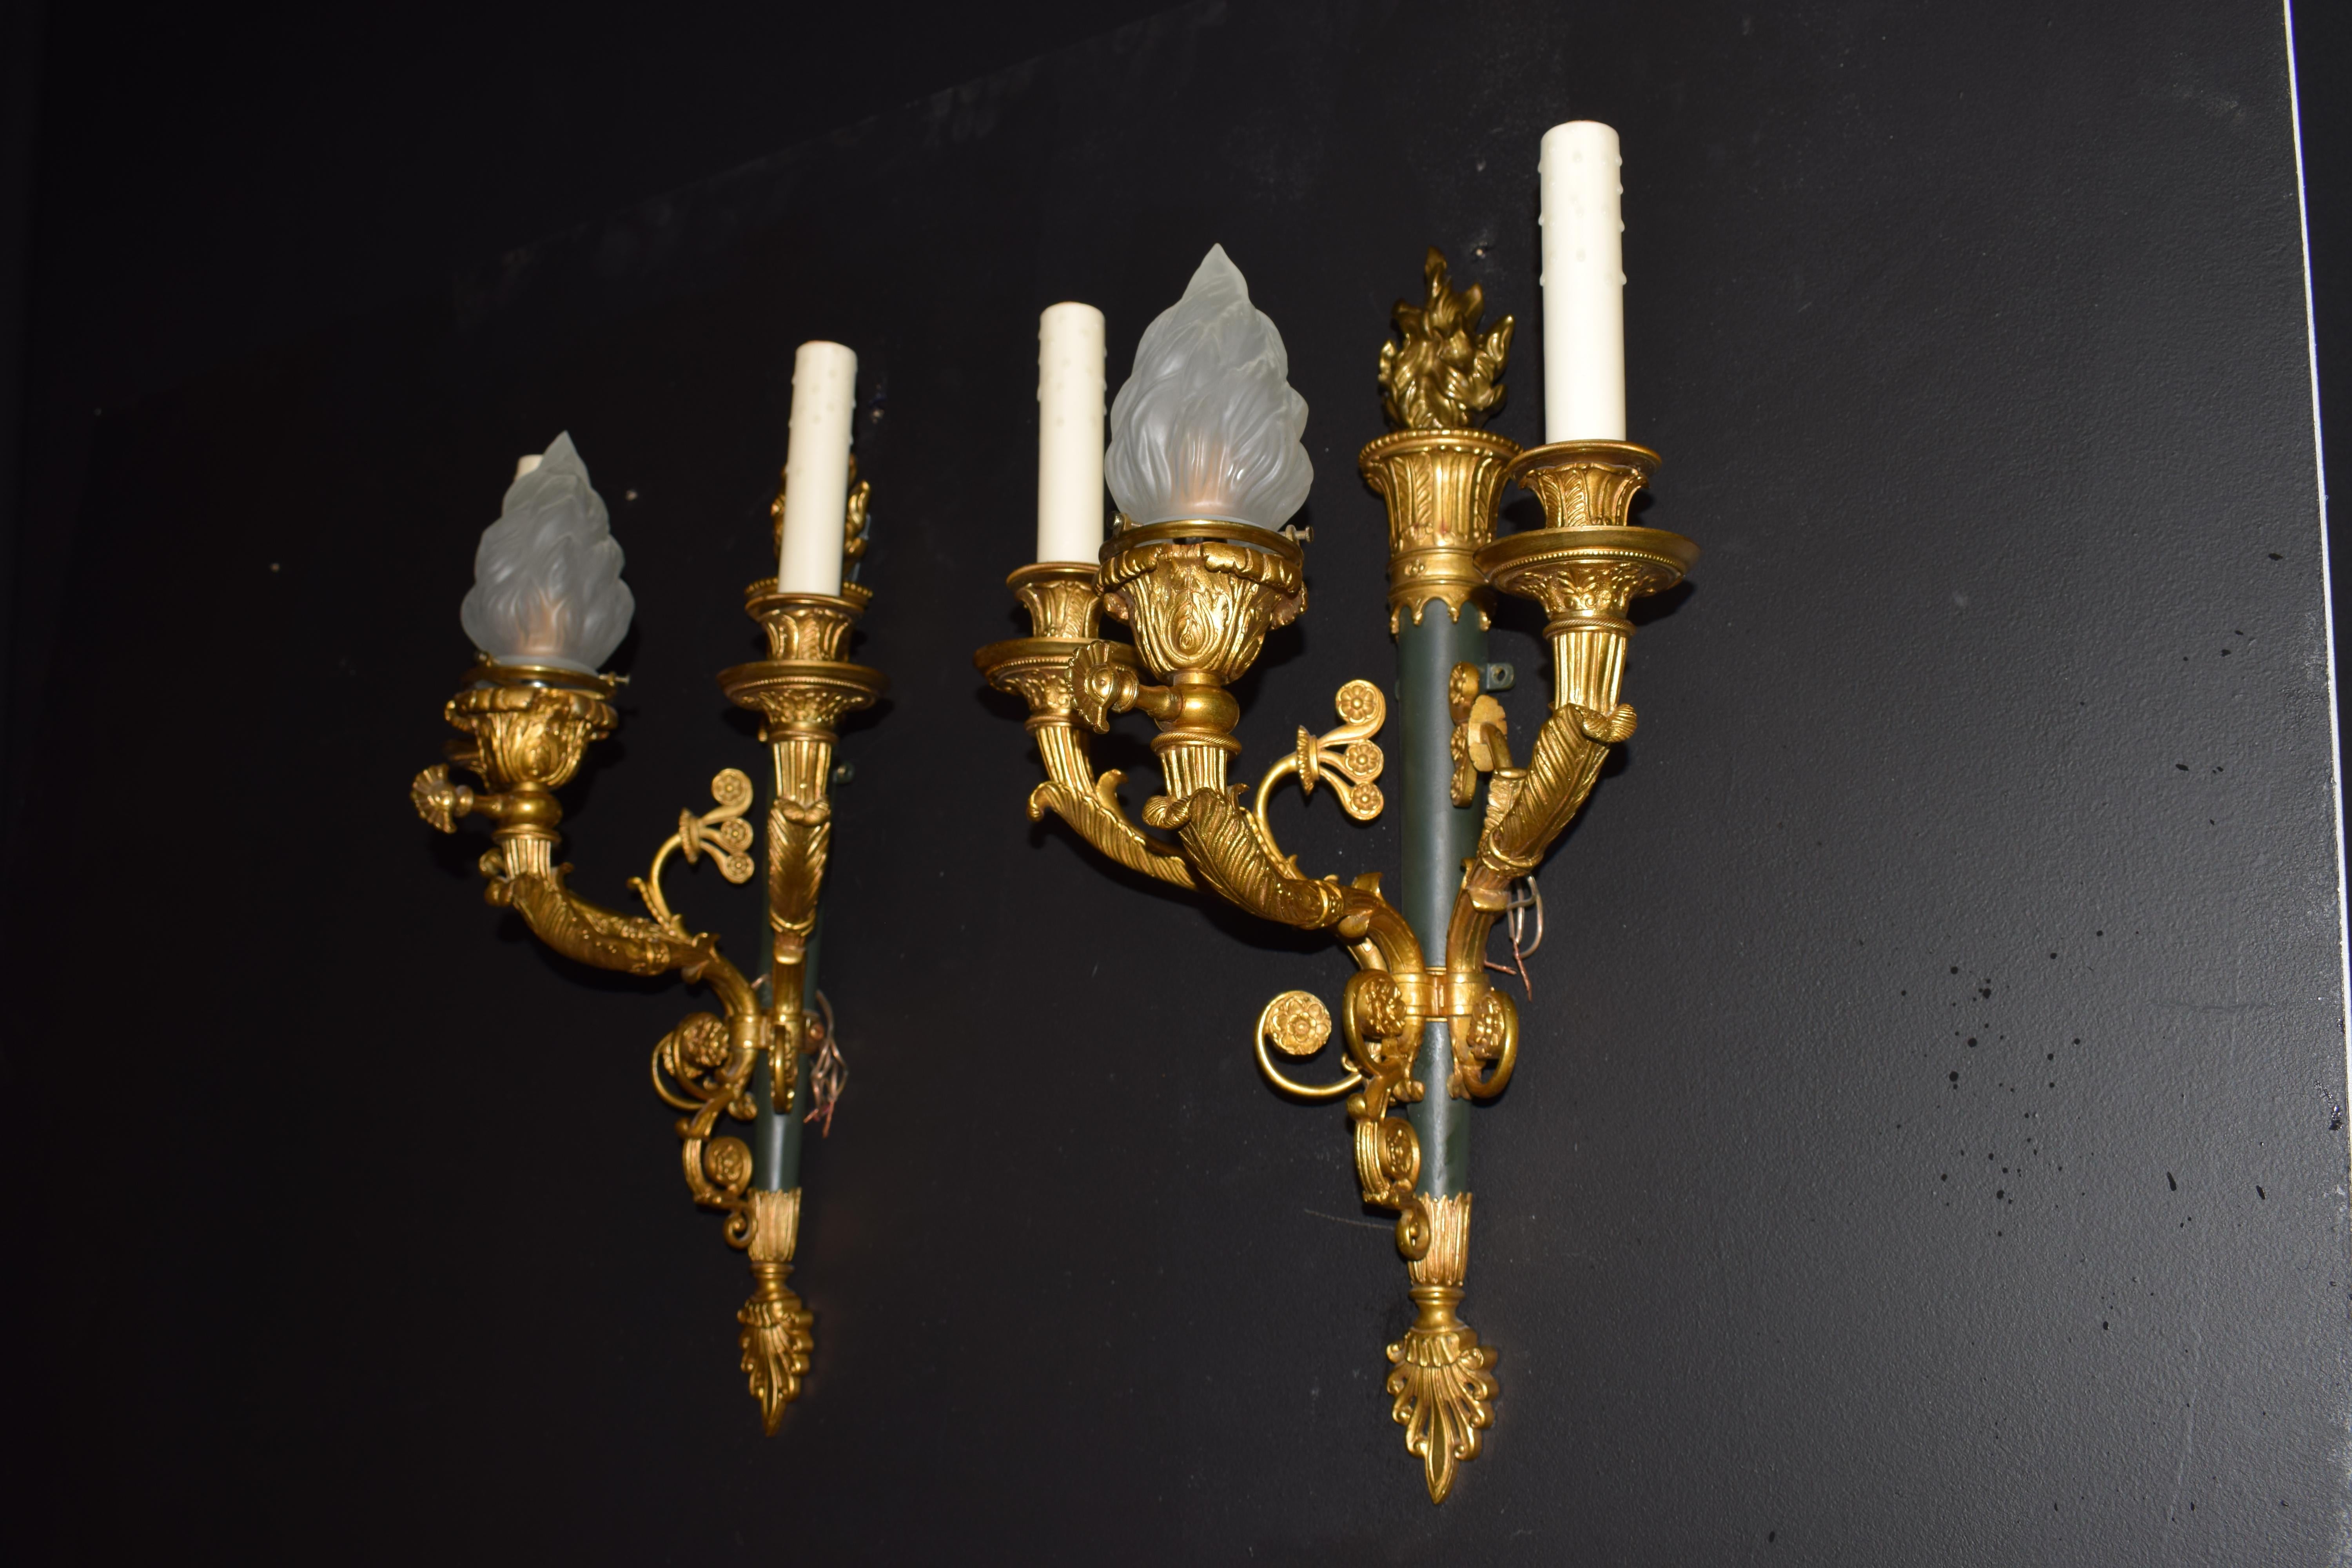 A magnificent pair of gilt bronze and patinated bronze wall sconces. 3-light
France, circa 1900
Dimensions: Height 21